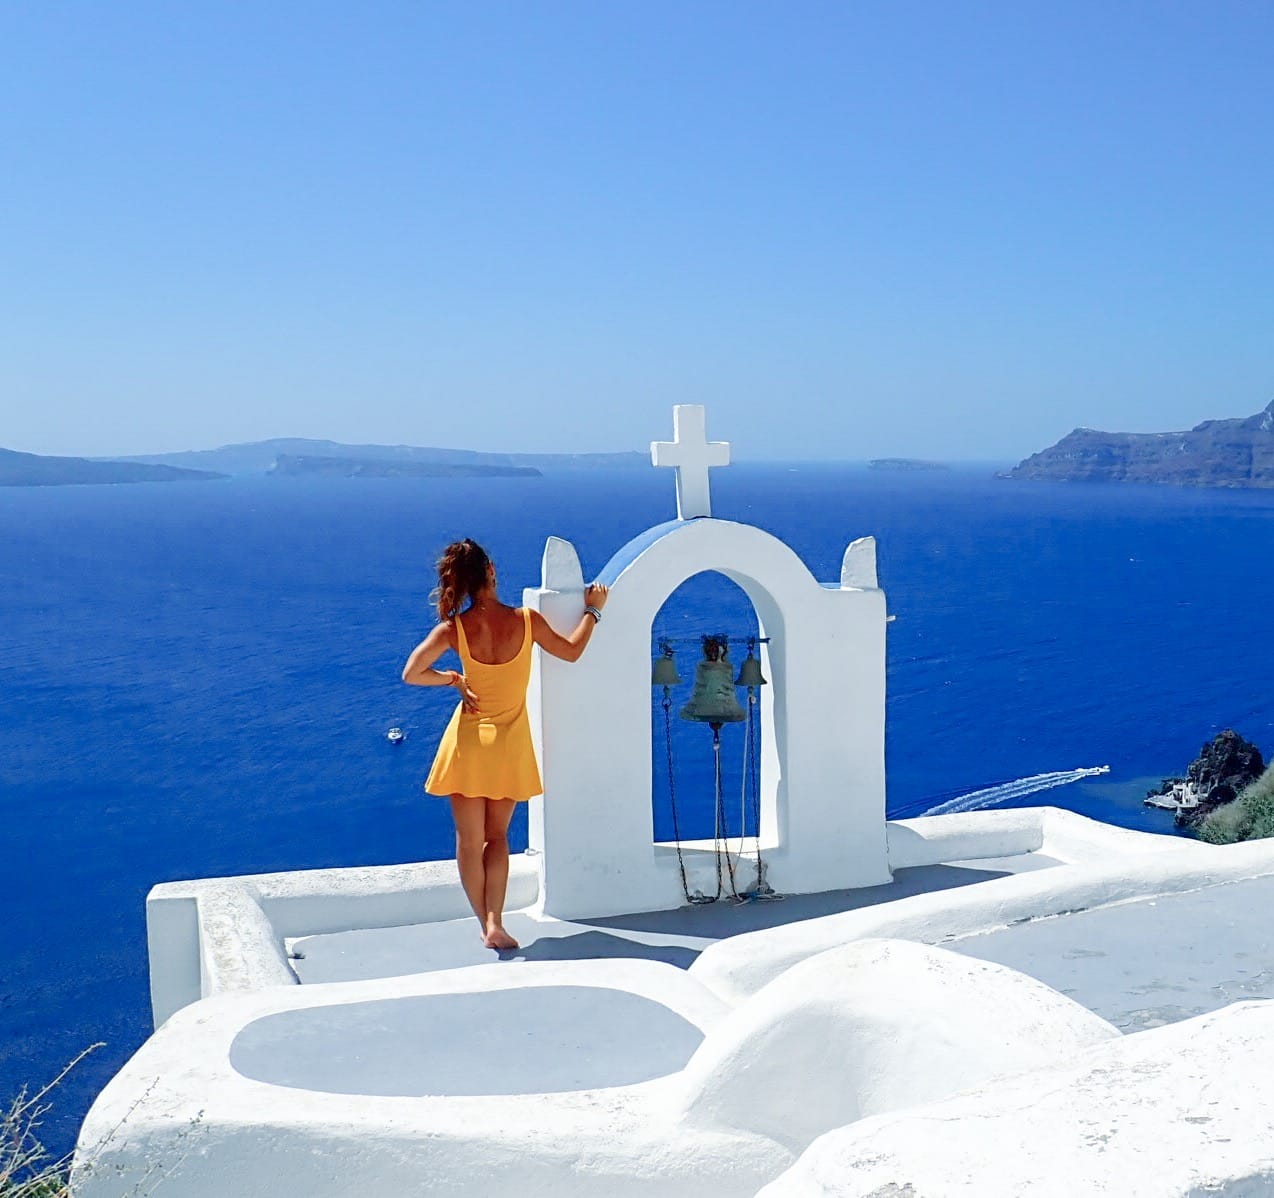 woman in yellow dress standing on the roof of a church looking out at the oceani in Santorini Greece